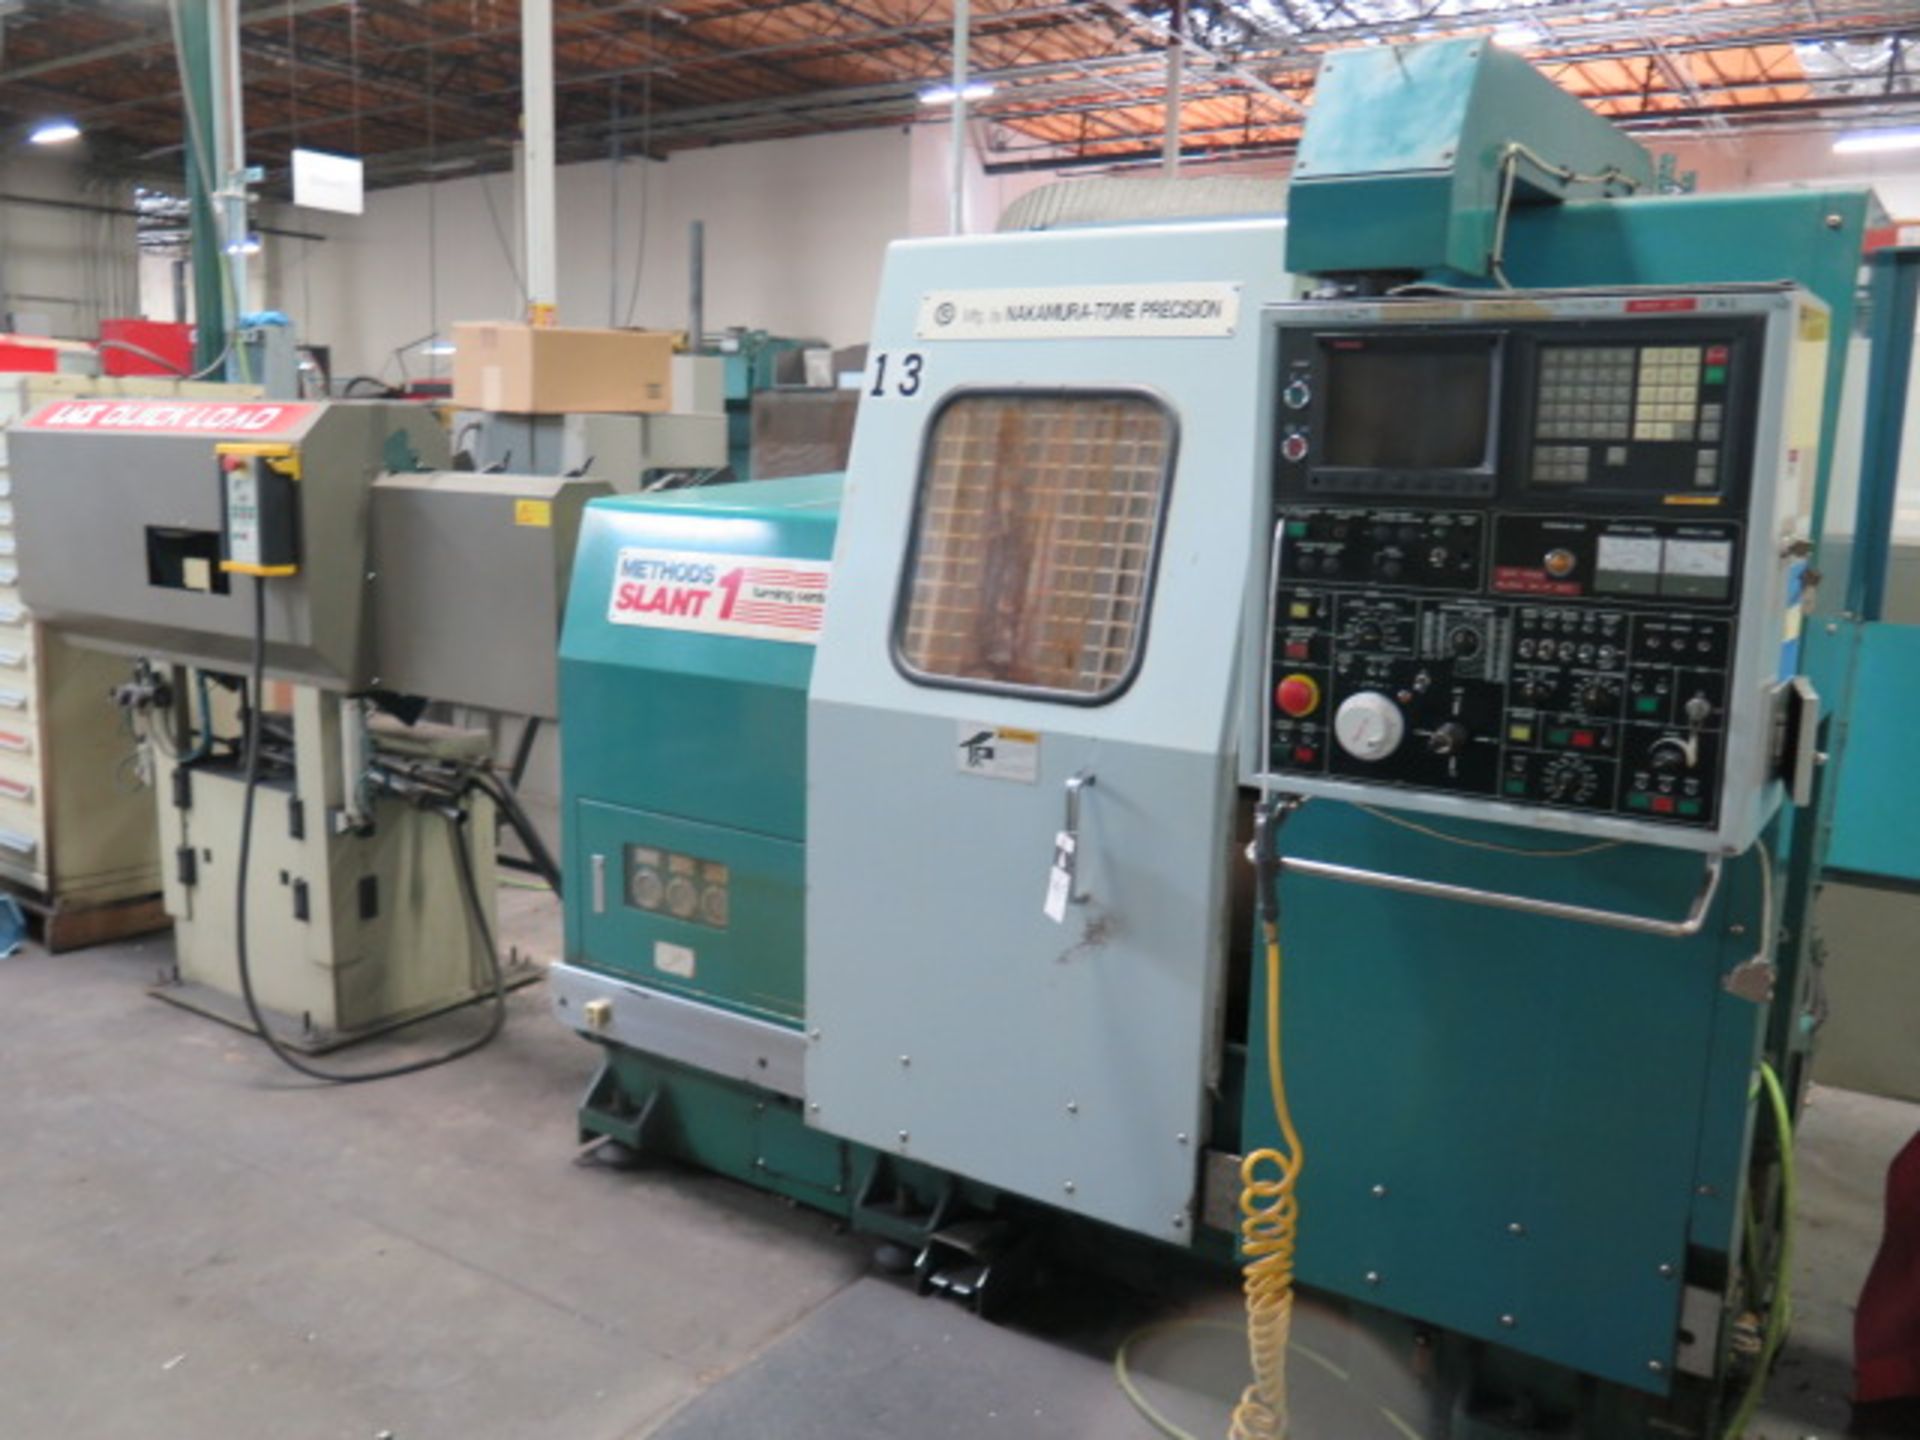 Nakamura Tome Methods Slant 1 CNC Turning Center s/n C24610 w/ Fanuc 11T, SOLD AS IS, LIVERMORE CA